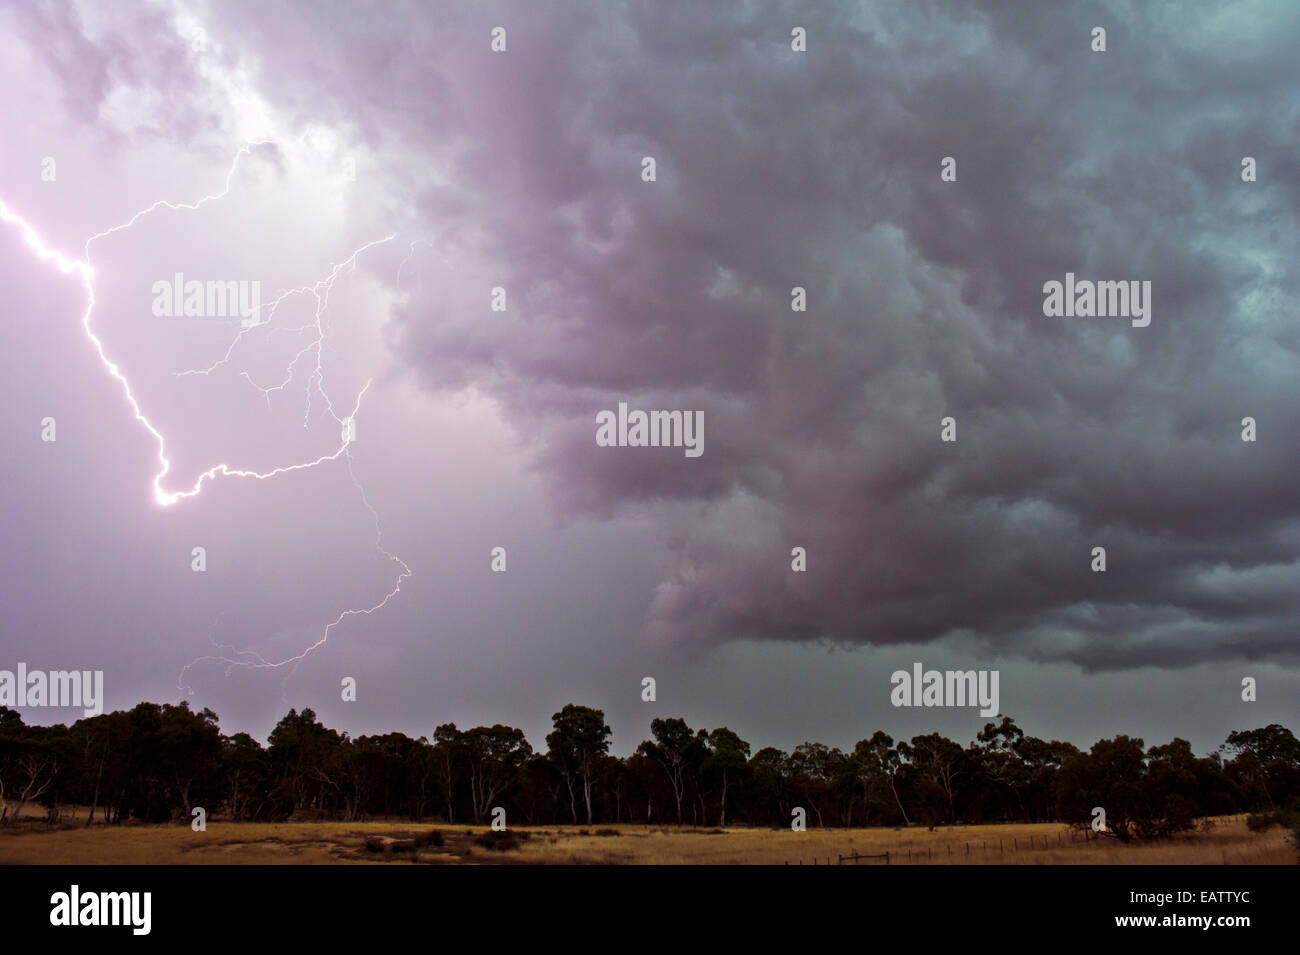 During thunder storms lightning can start fires in eucalyptus forests. Stock Photo